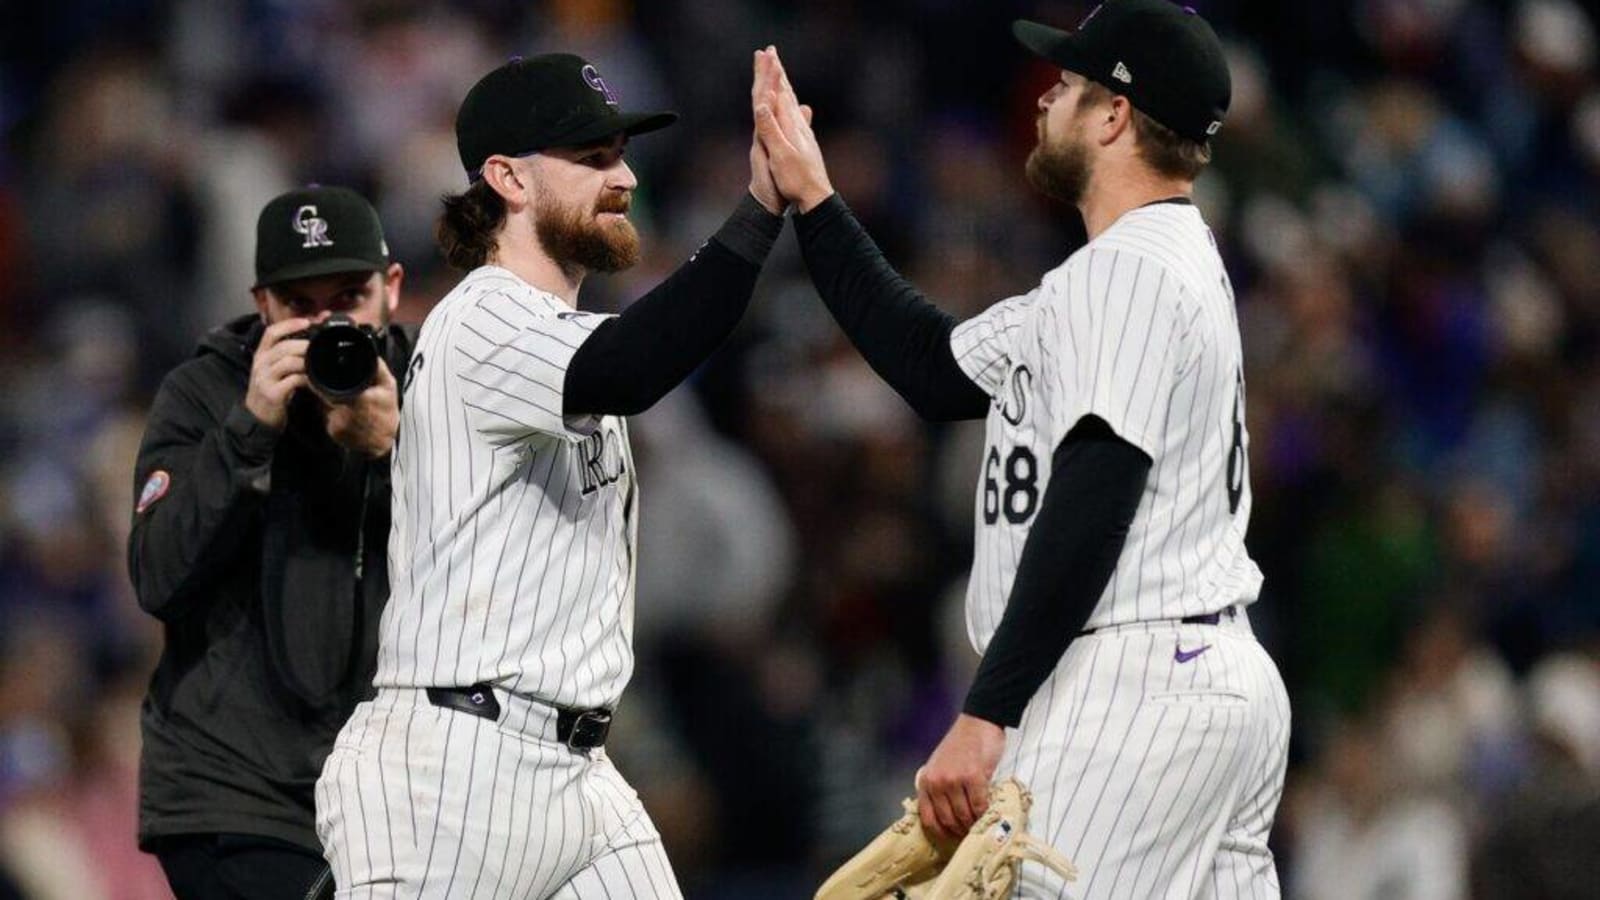 Rockies Win Back-To-Back Games For the First Time This Season